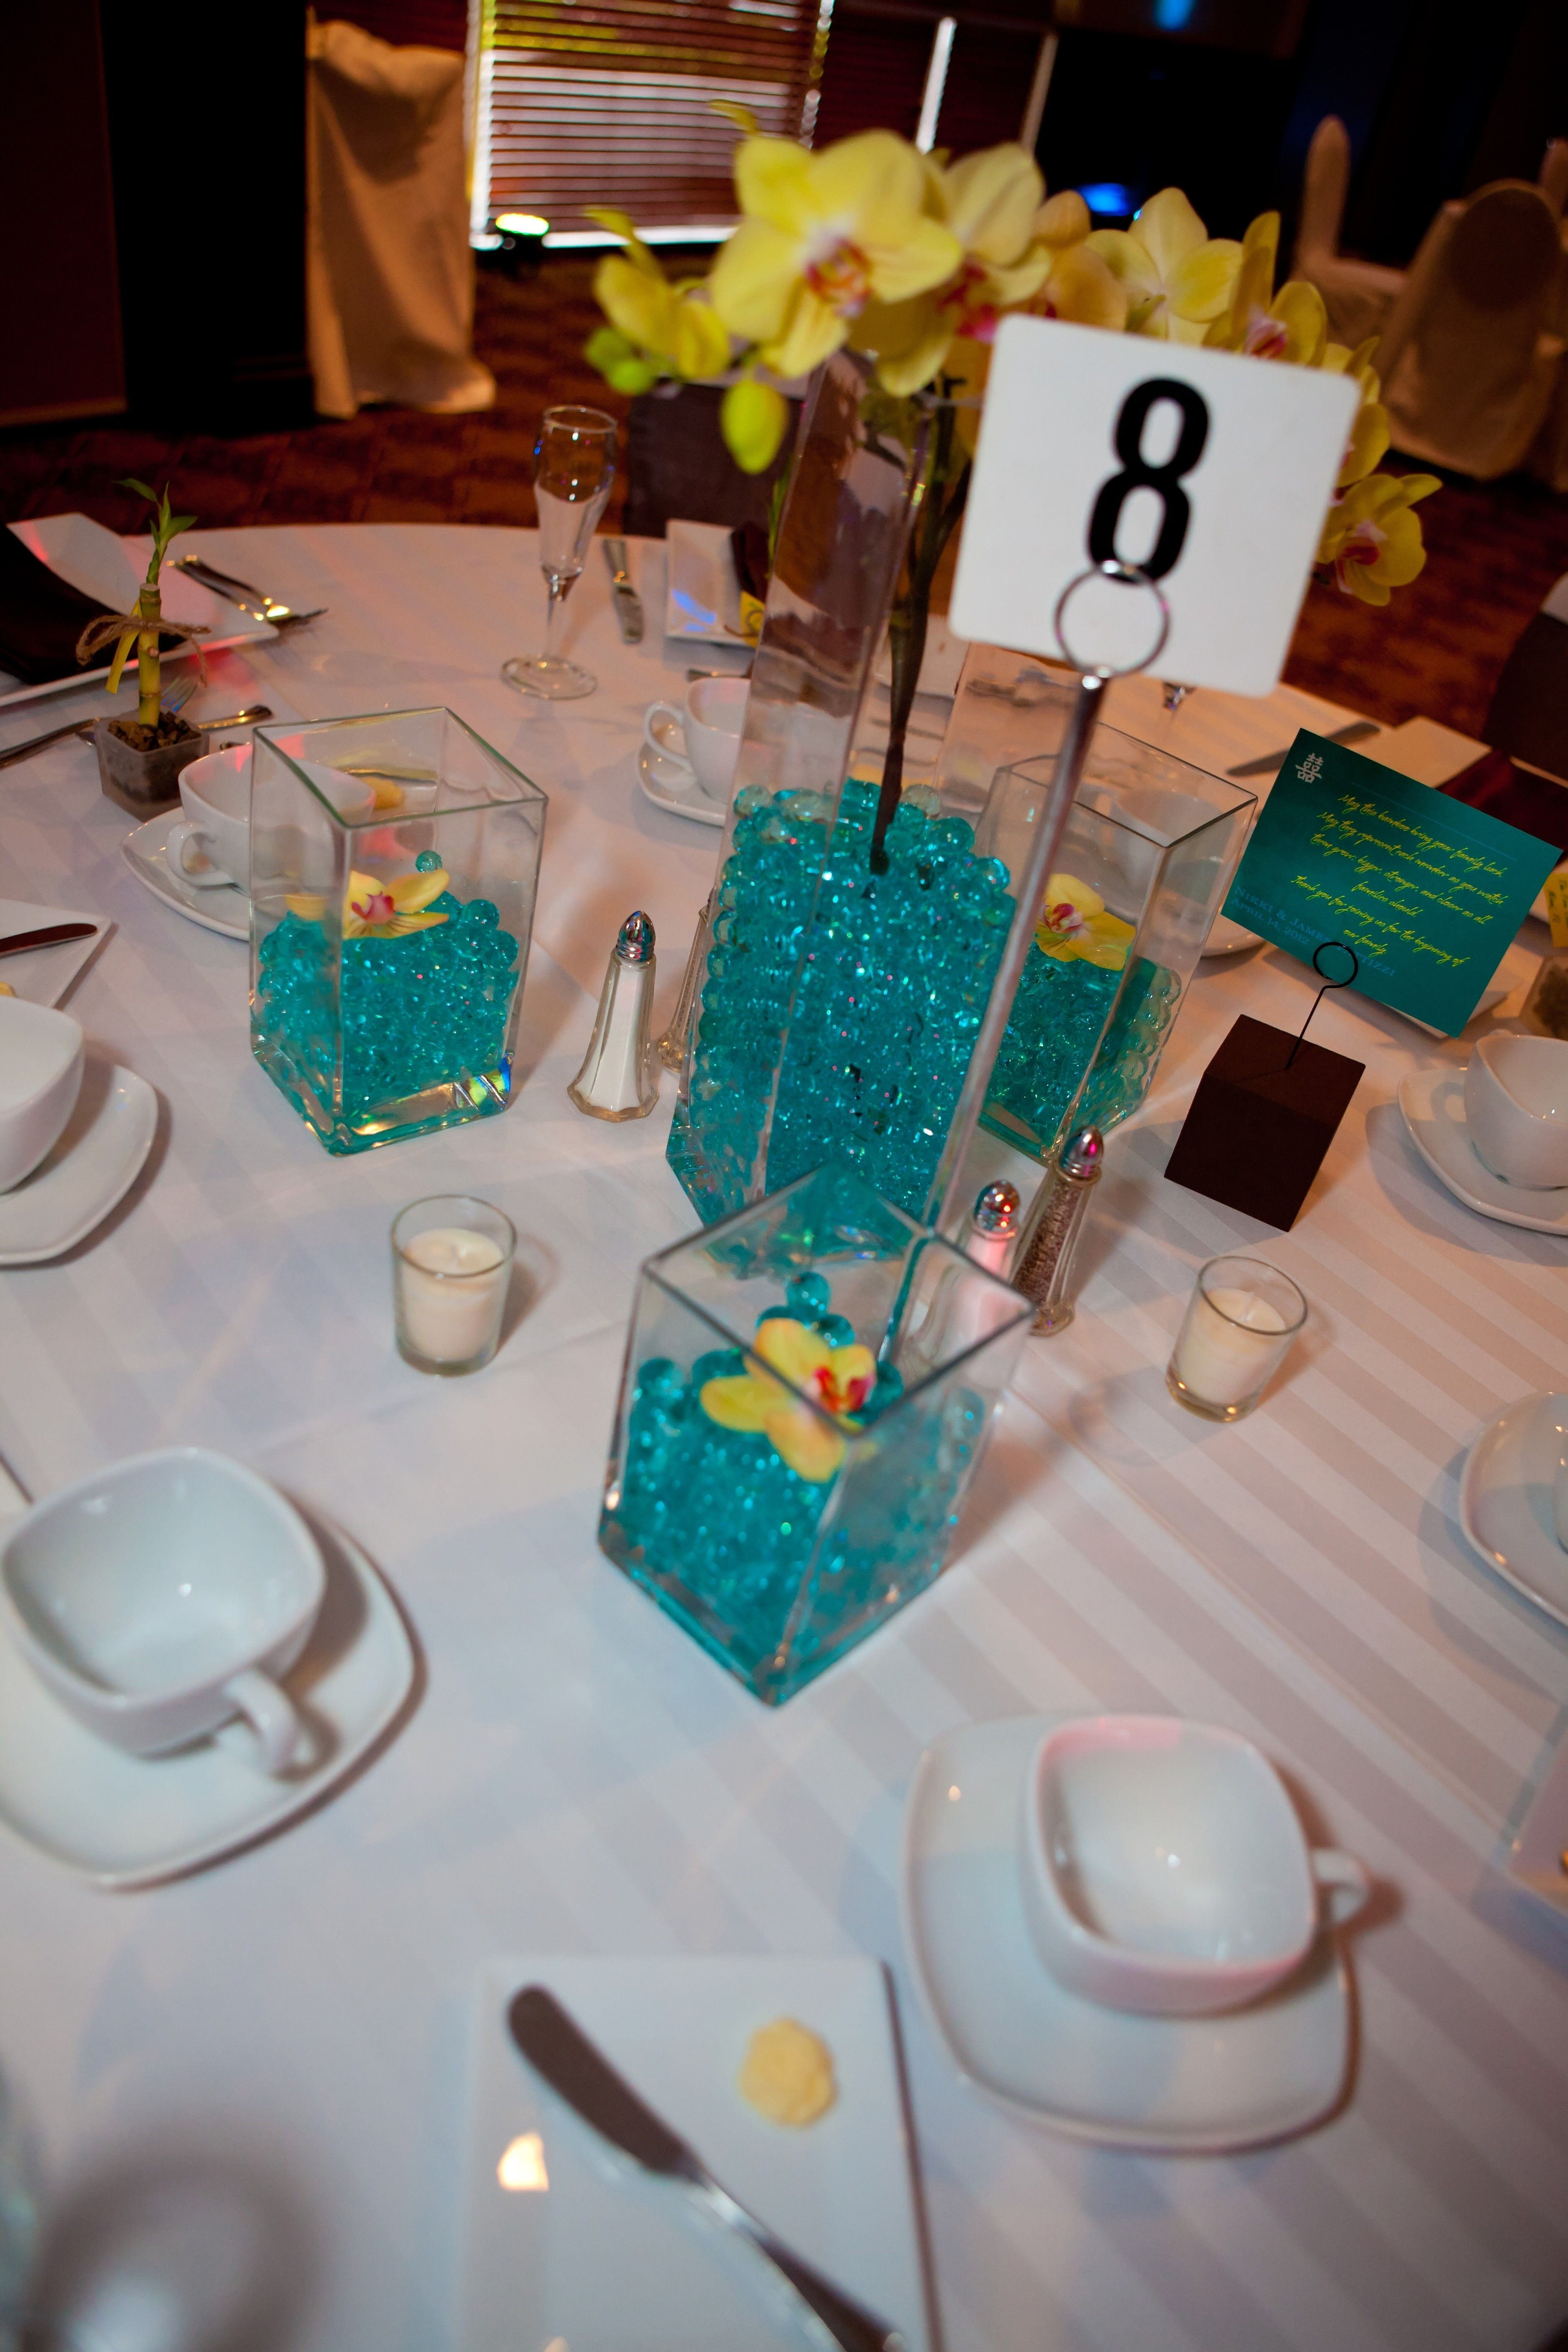 20 Amazing 3 Piece Vase Centerpiece 2024 free download 3 piece vase centerpiece of wedding centerpieces square vases teal water beads yellow for centerpieces square vases teal water beads yellow orchids candles